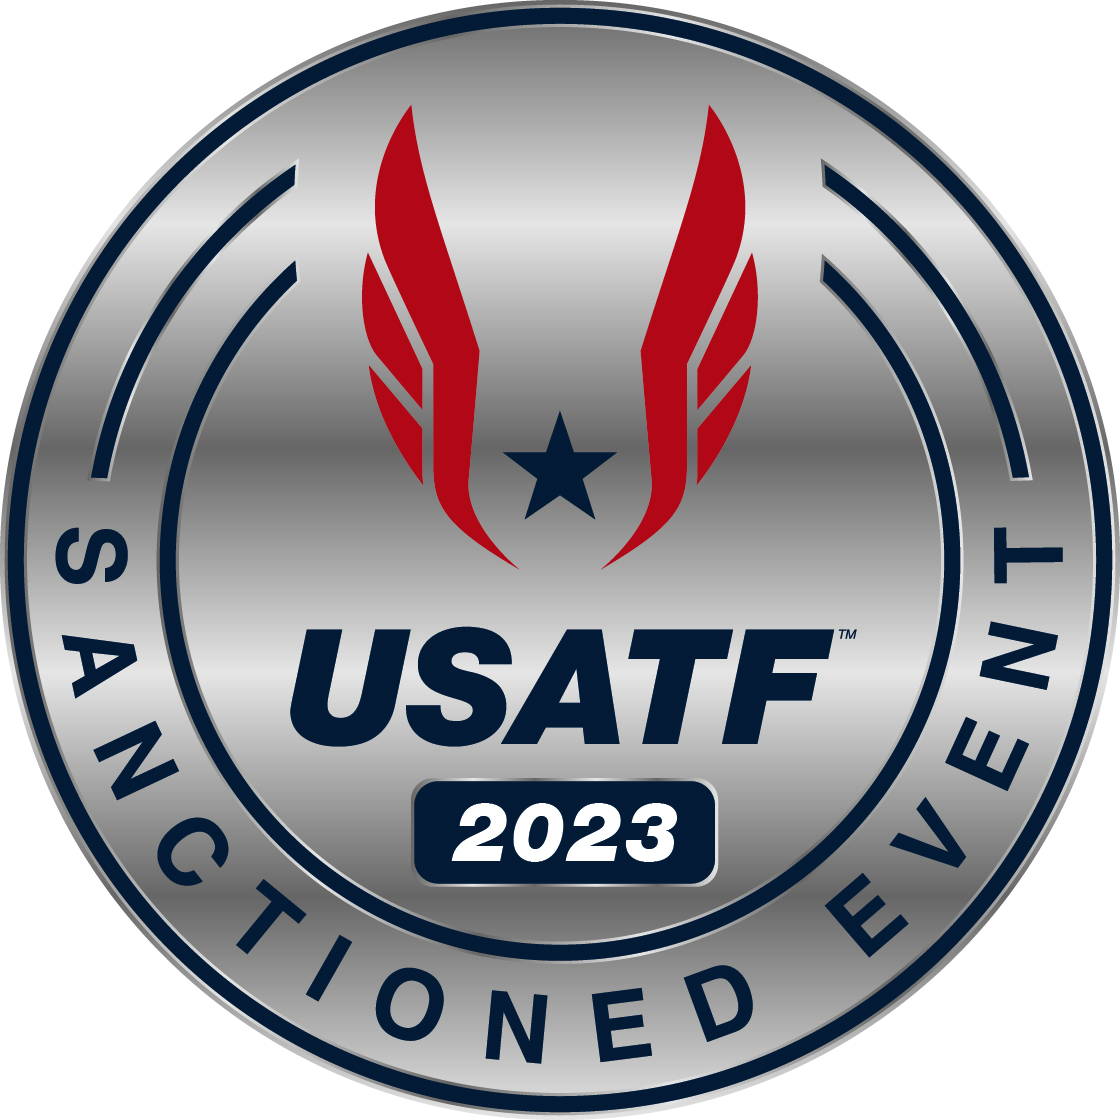 The Newark Mile 4k is a USATF Sanctioned Event.